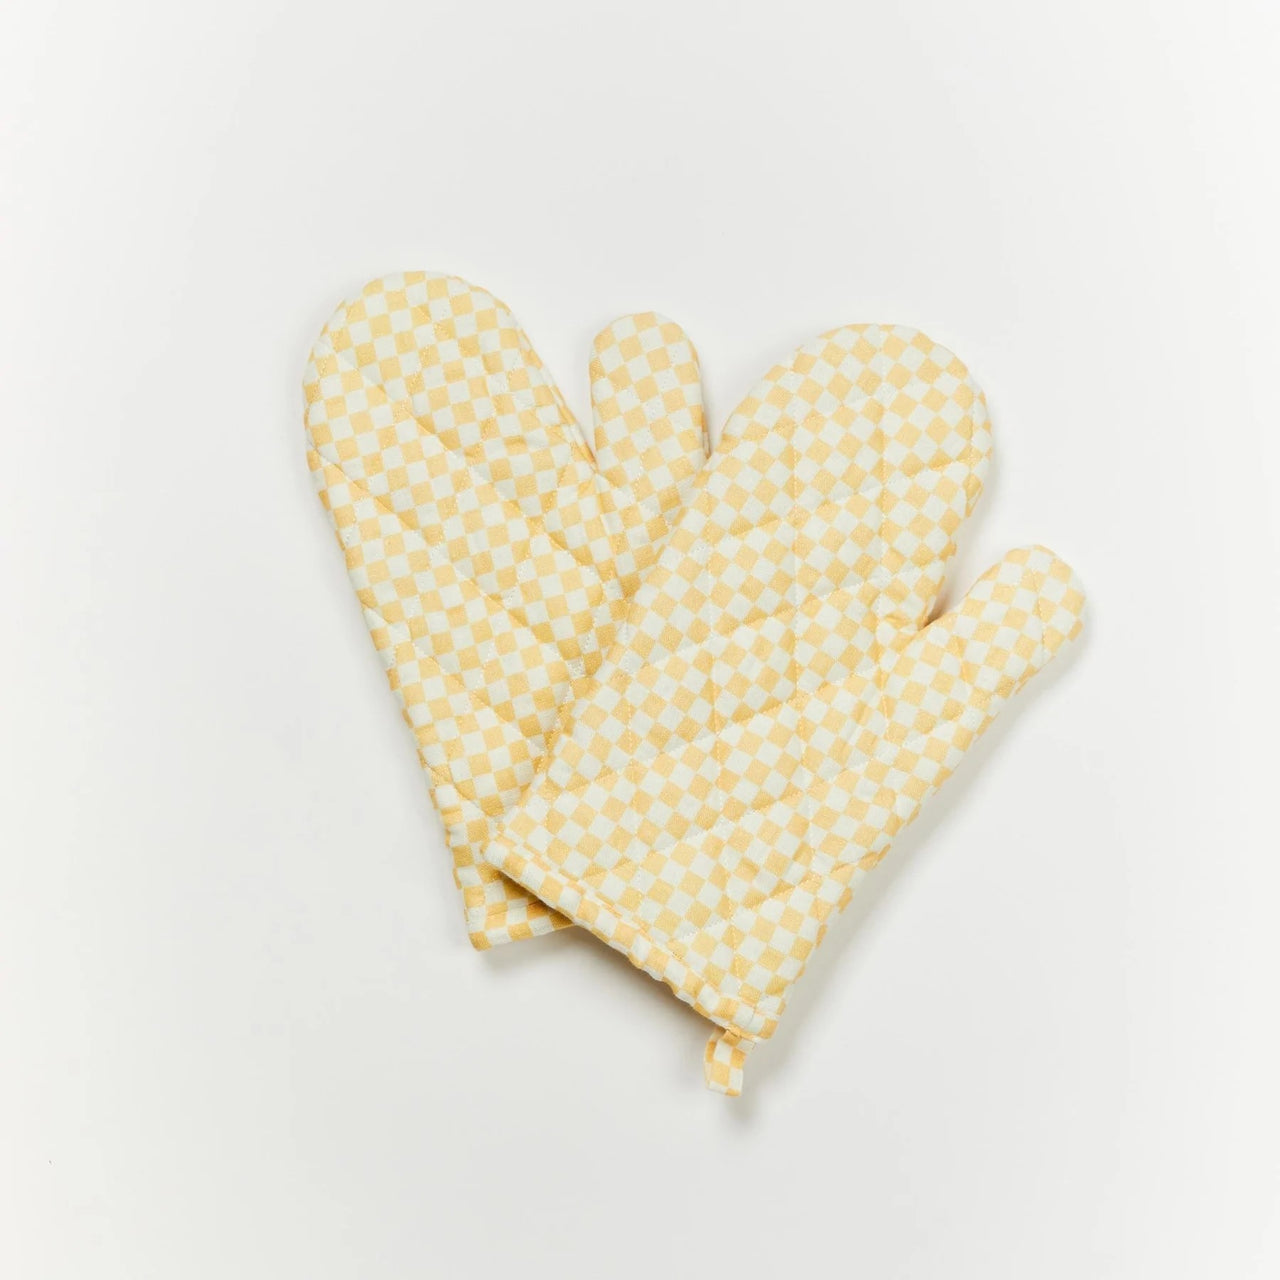 Oven Gloves (Set of 2) | Tiny Checkers Peach by Bonnie and Neil. Australian Art Prints and Homewares. Green Door Decor. www.greendoordecor.com.au